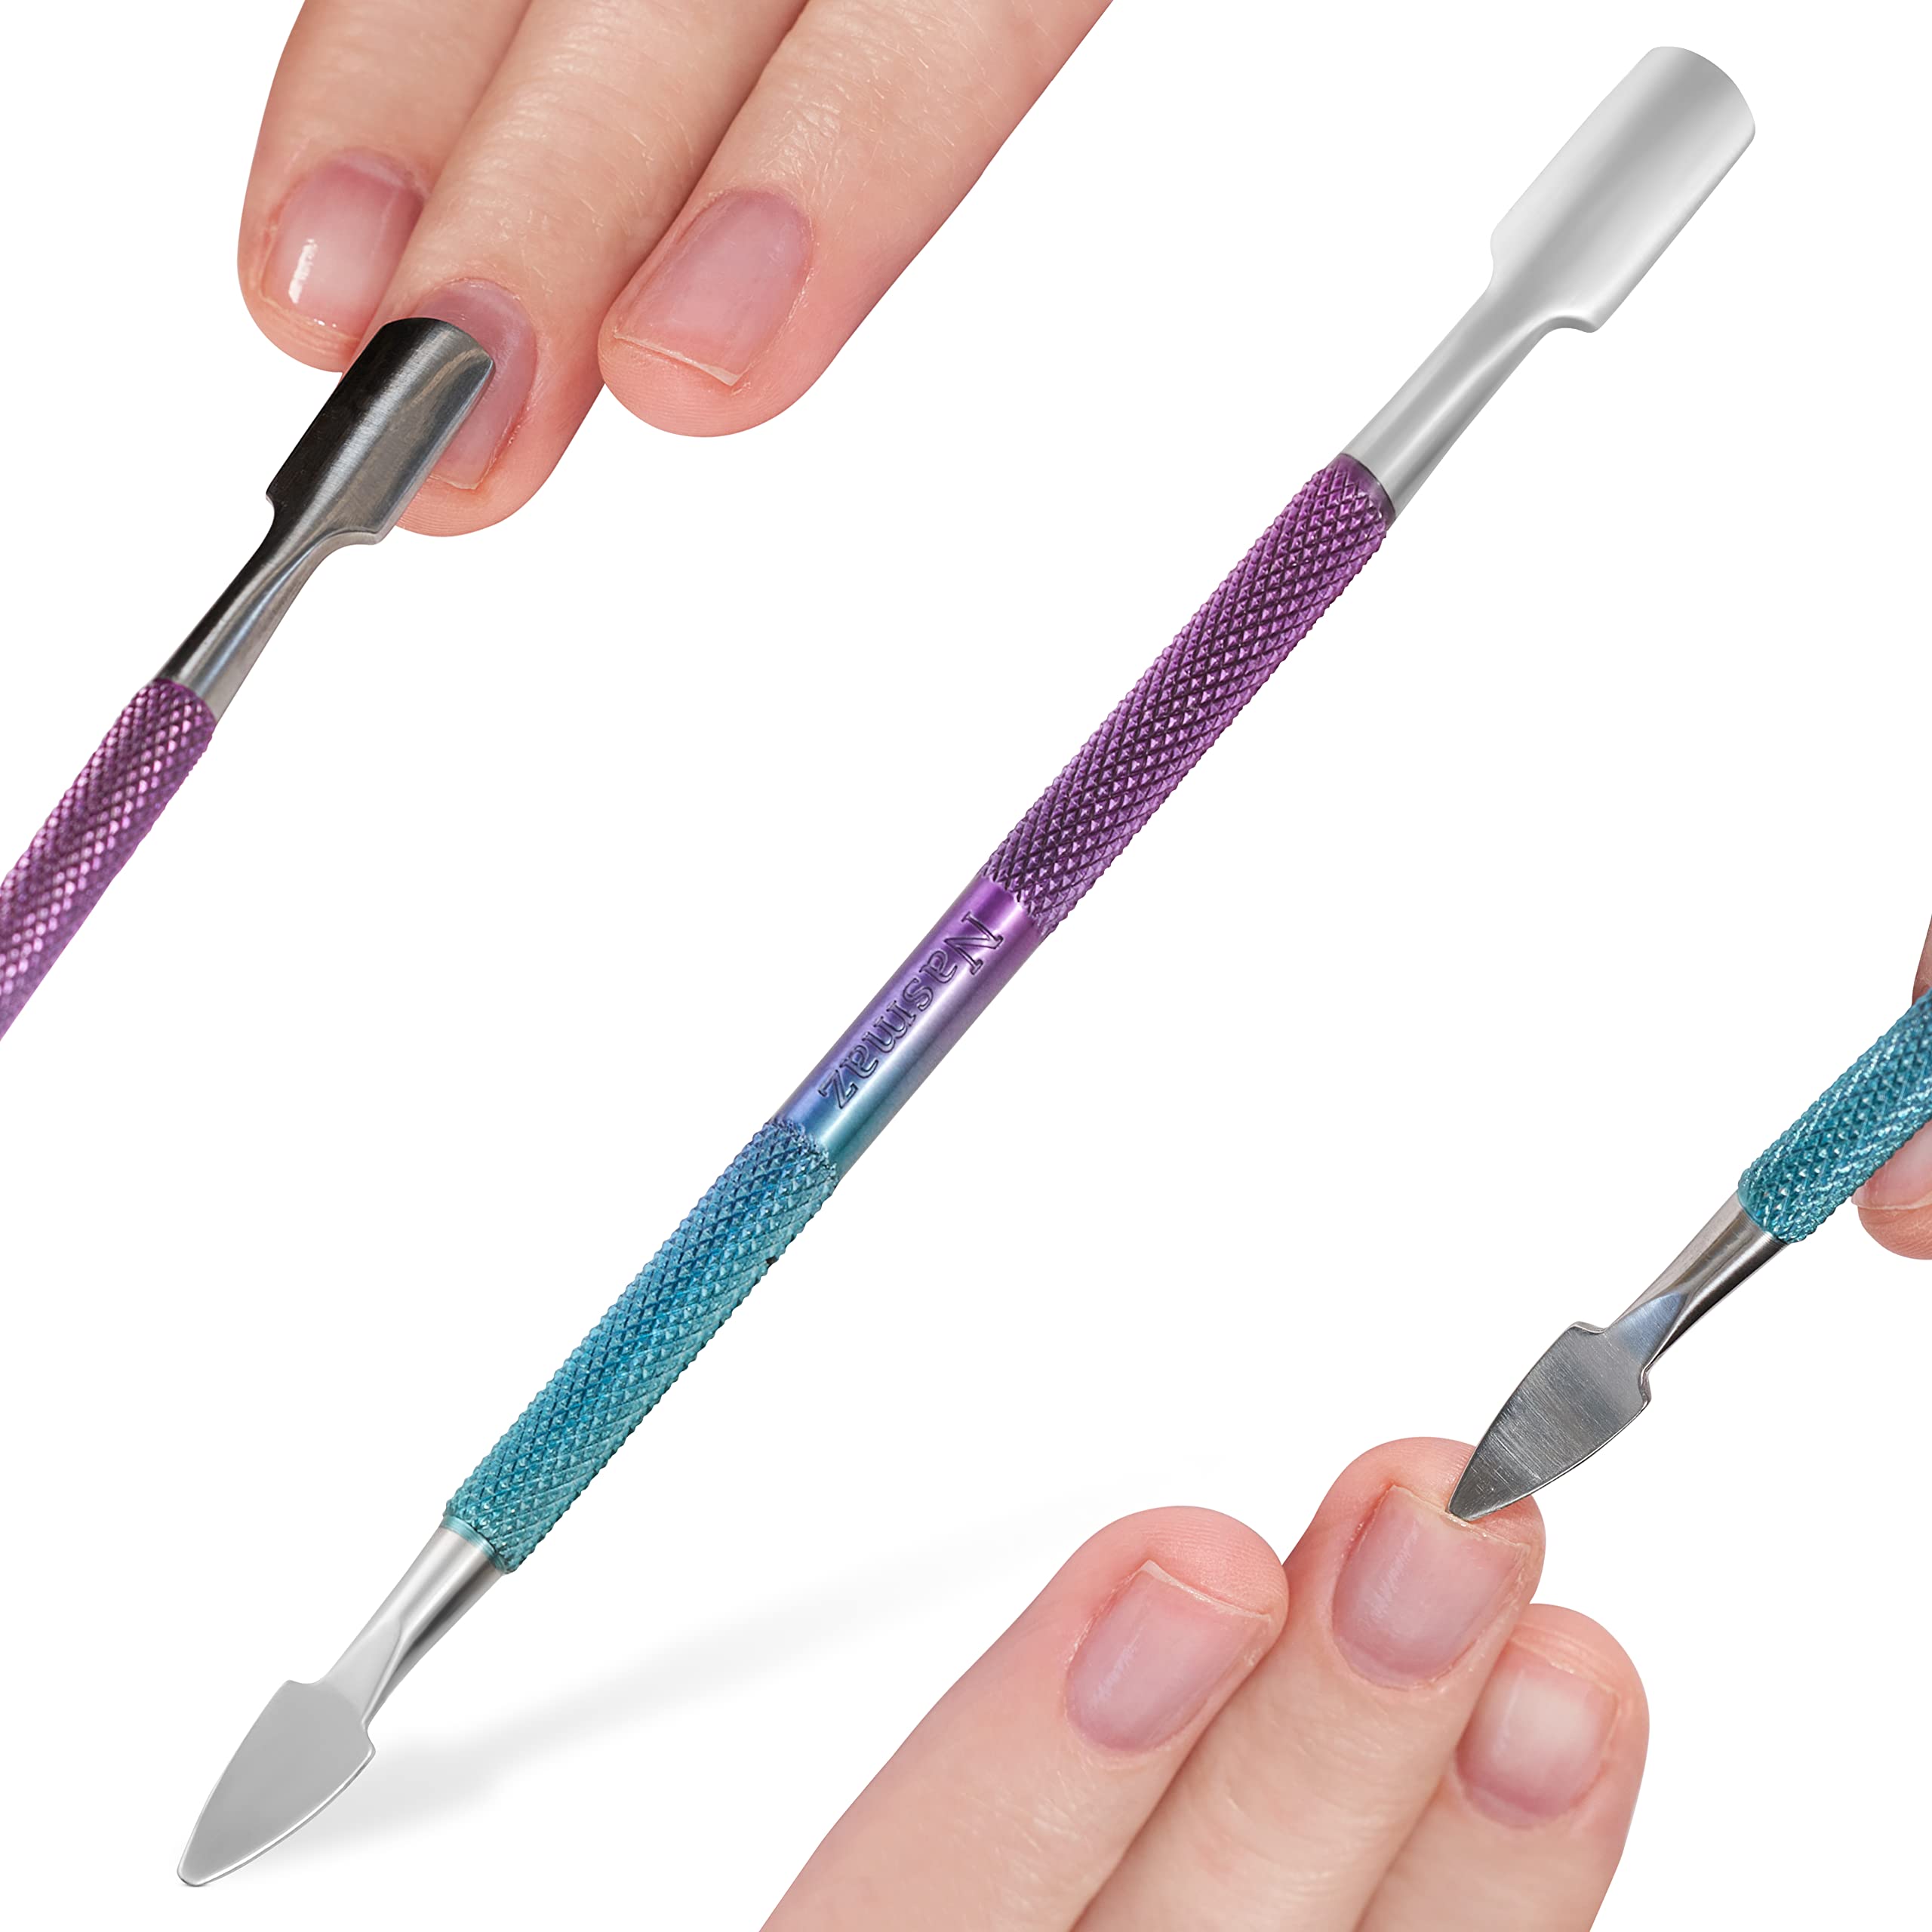 Cuticle Pusher Tool Dual Sided Premium Quality Metal Nail Scraper - Cleans nails without damage - Spoon pushes cuticles away from nails